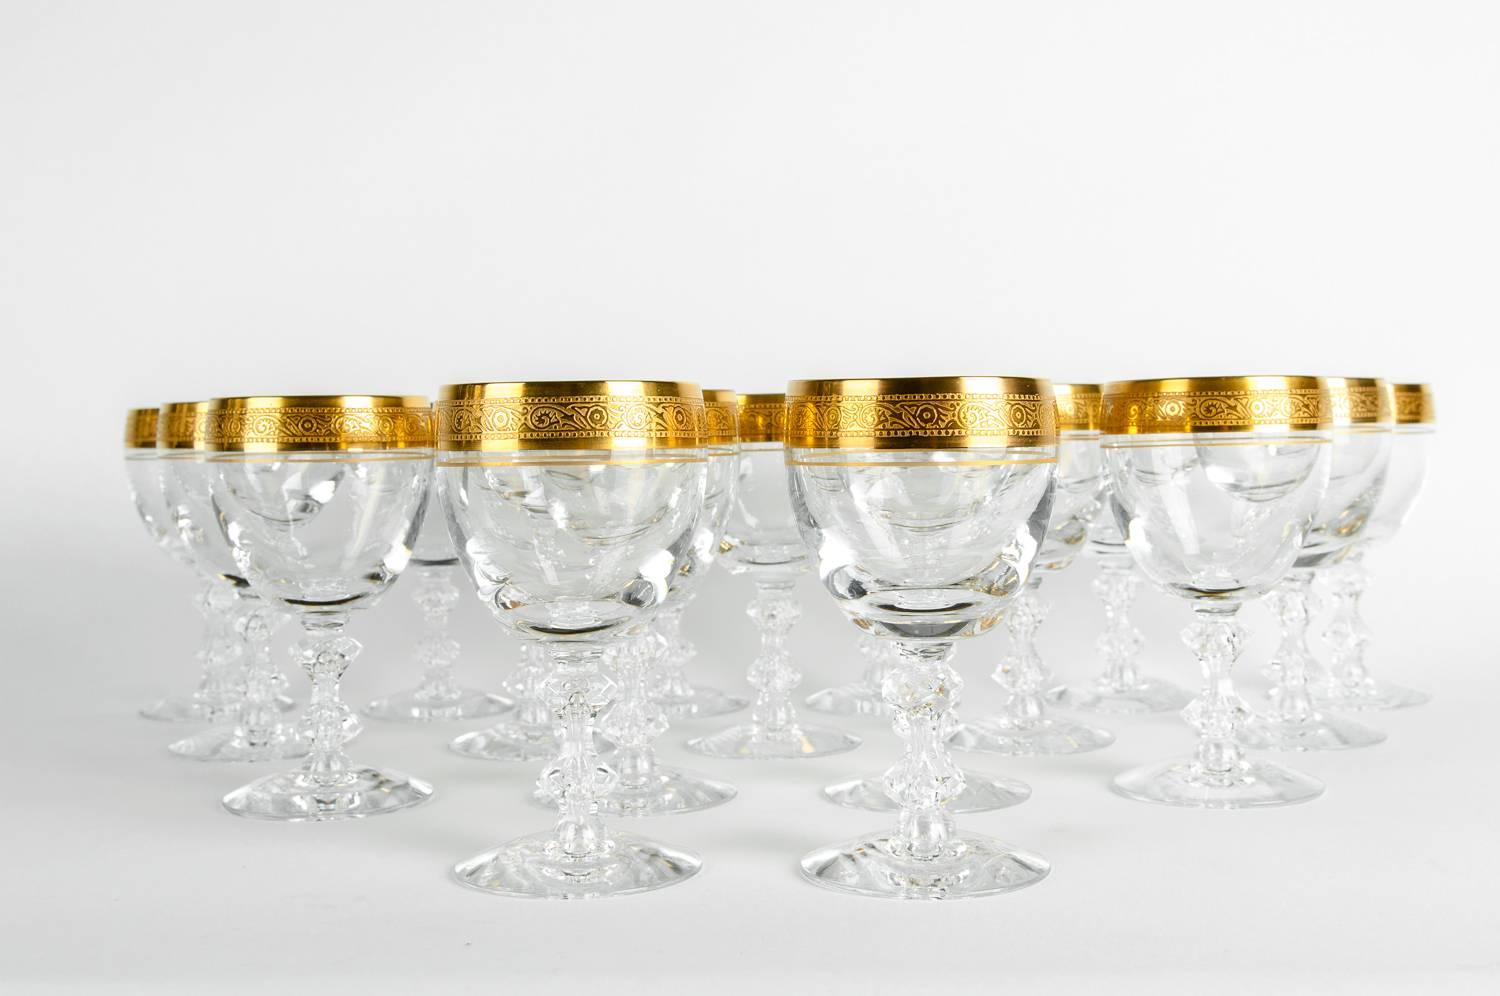 Early 20th Century Vintage Cut Crystal with Gold Design Top Wine/Water Glassware Set